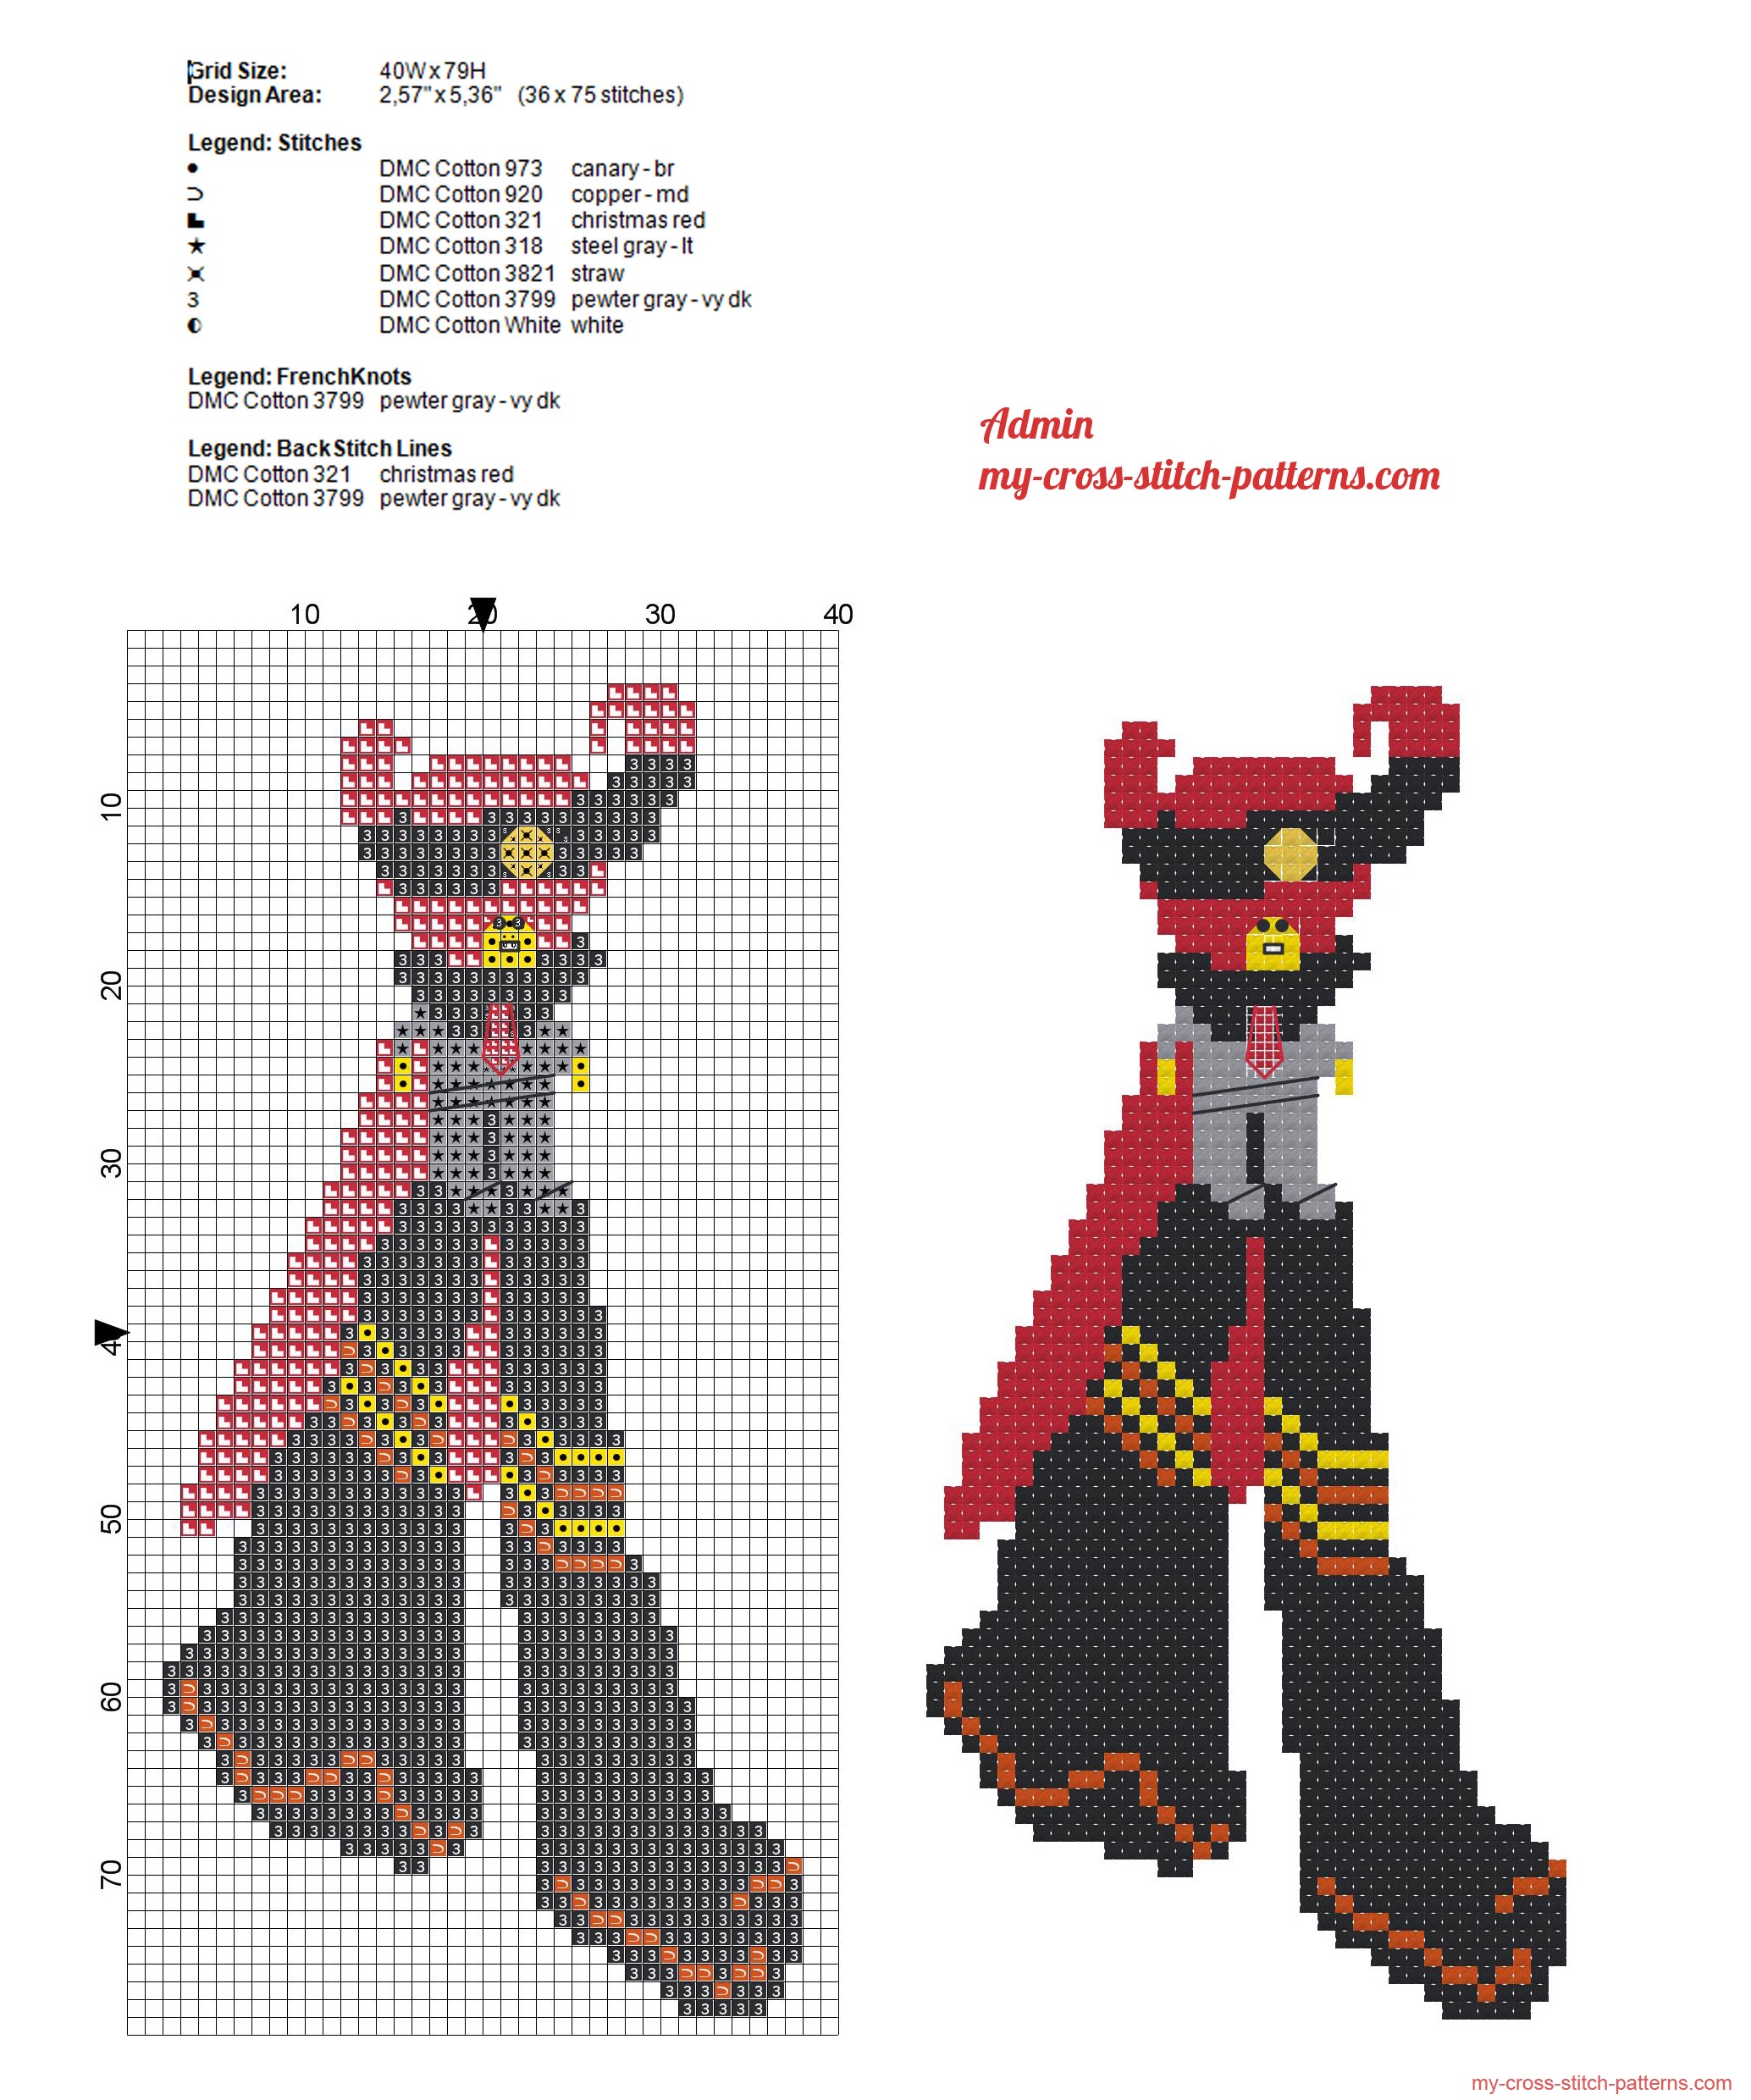 evil_lord_business_the_lego_movie_cross_stitch_pattern